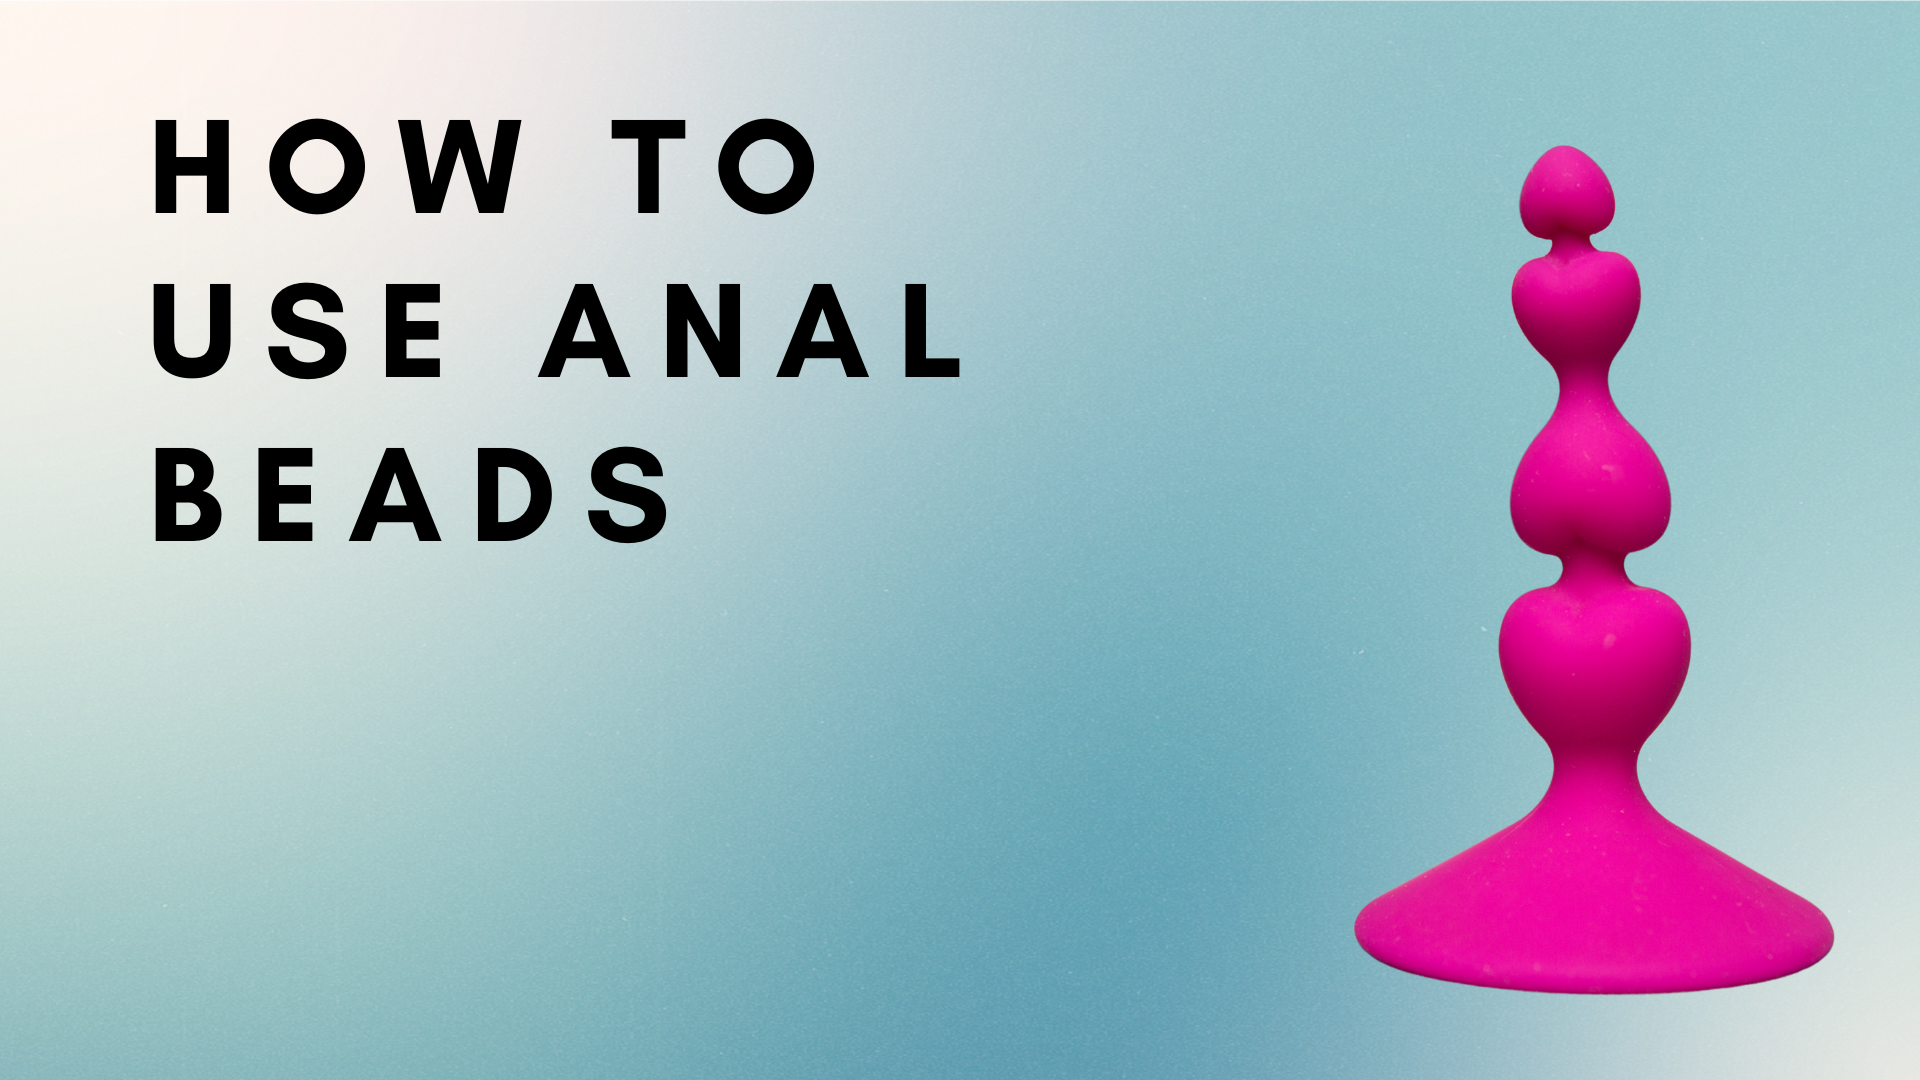 How to Use Anal Beads to Maximize Your Pleasure Bedbible